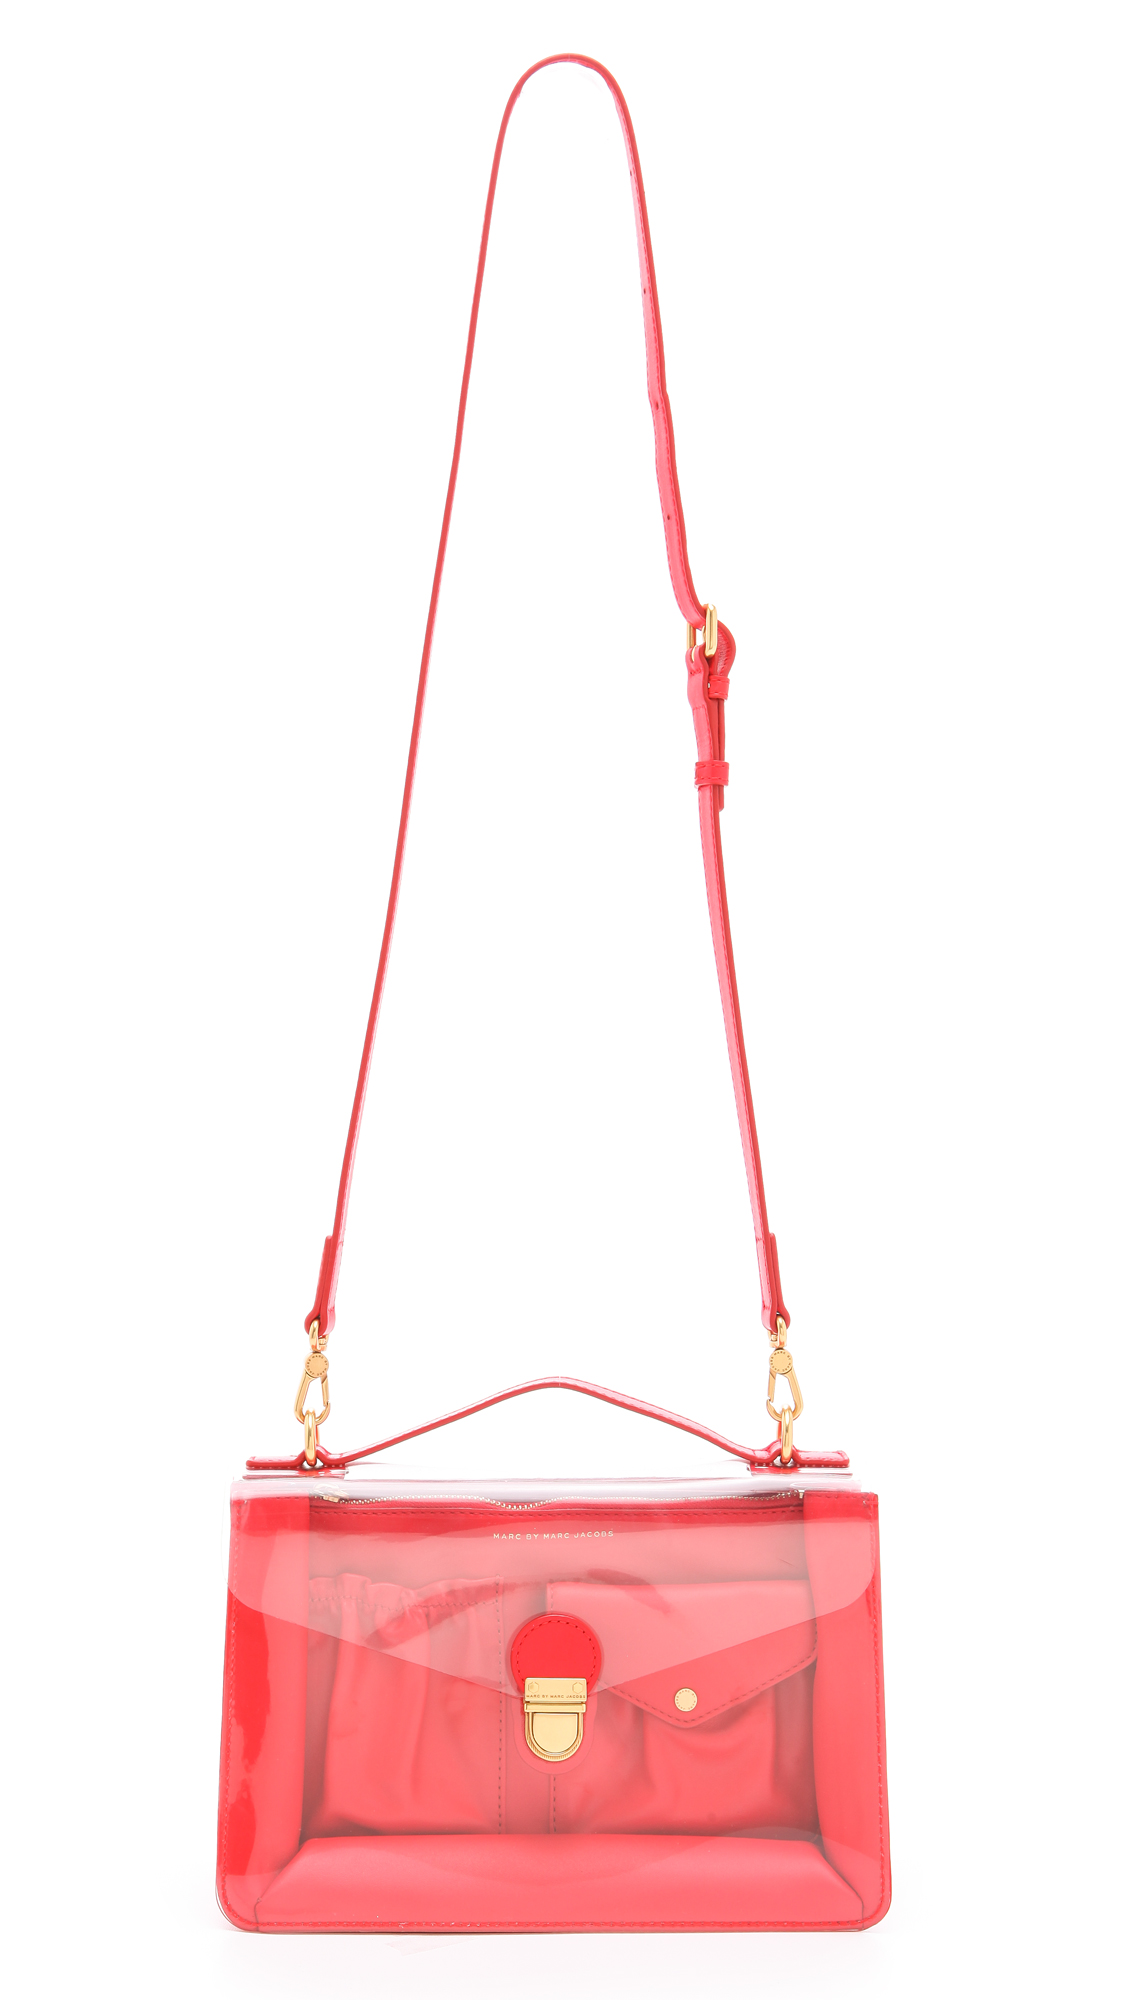 Lyst - Marc by marc jacobs Clear Top Handle Shoulder Bag